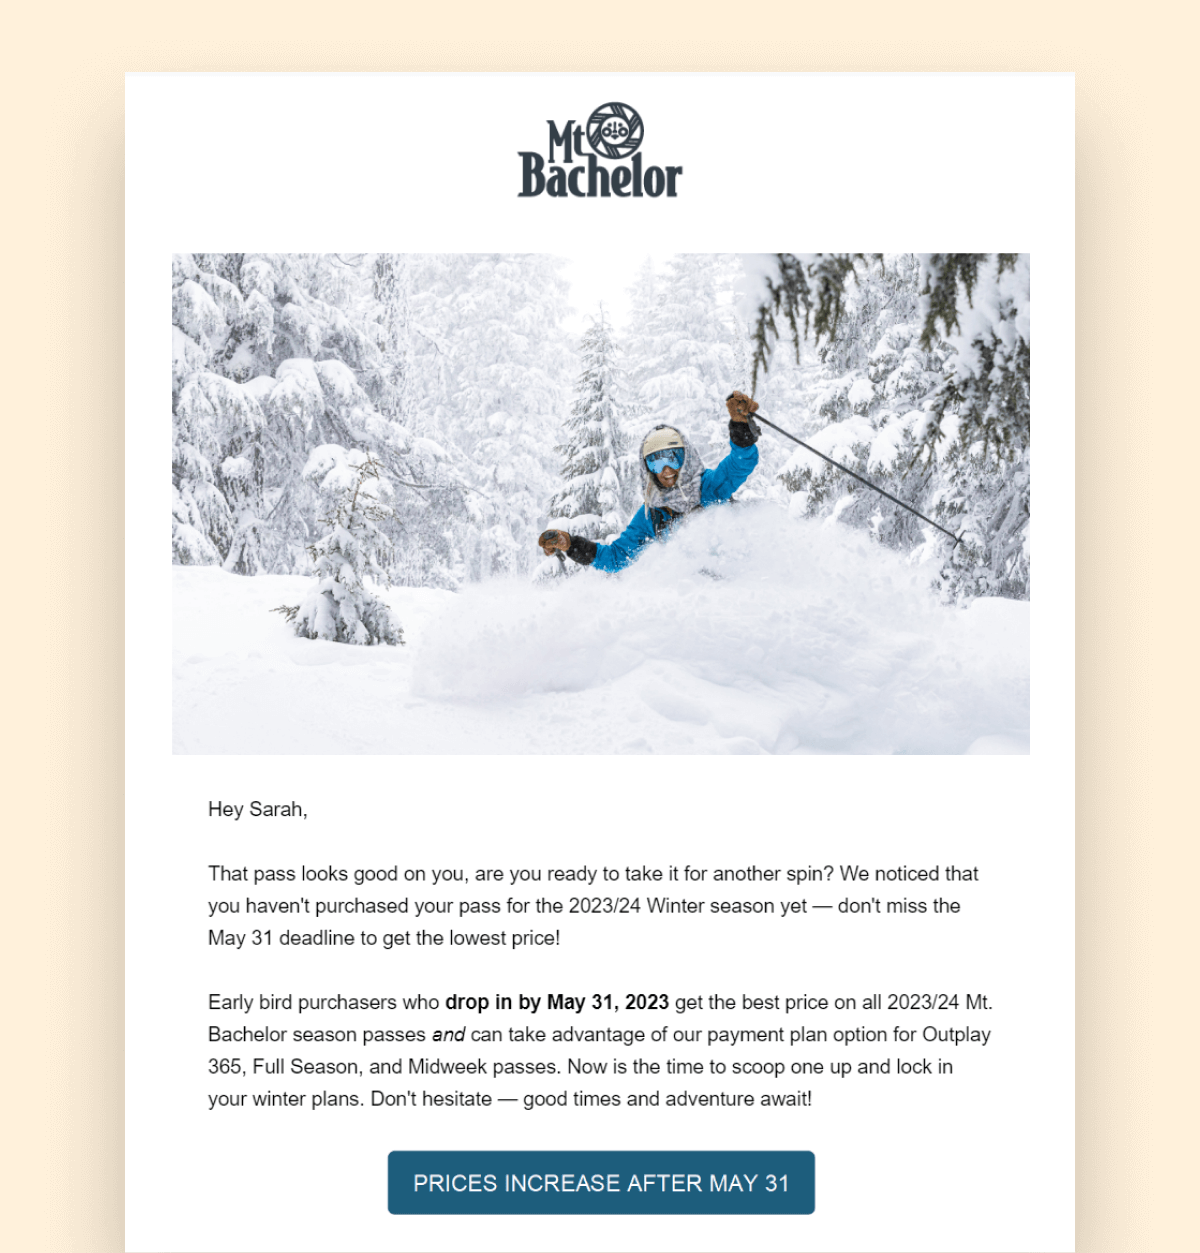 mt bachelor pass purchase reminder